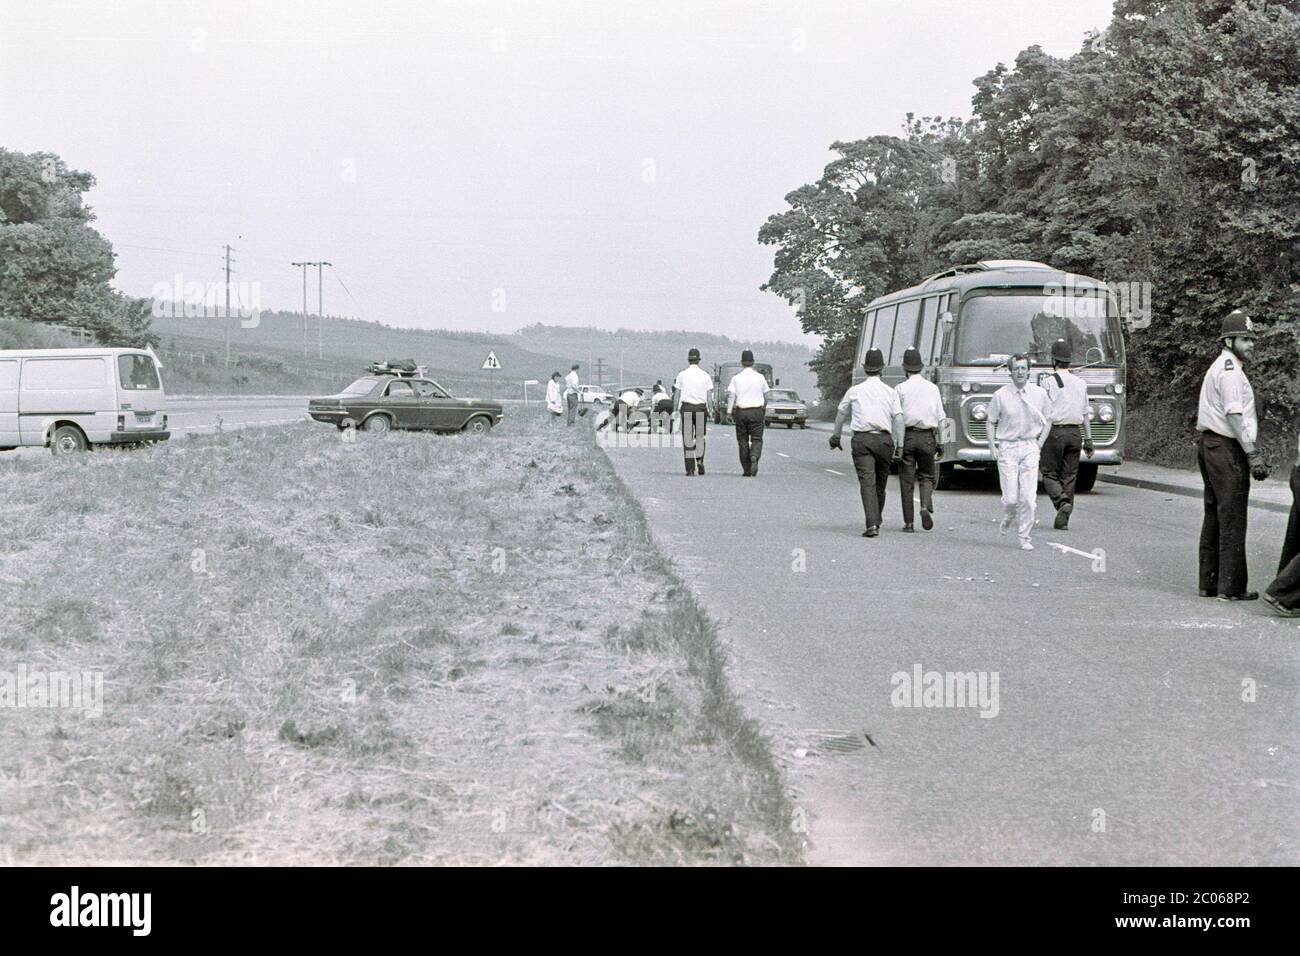 Wiltshire Police seal off the A303, a main road to the Westcountry, and try to stop a convoy of New Age Travellers reaching Stonehenge to celebrate the summer solstice.  UK 1985. Stock Photo